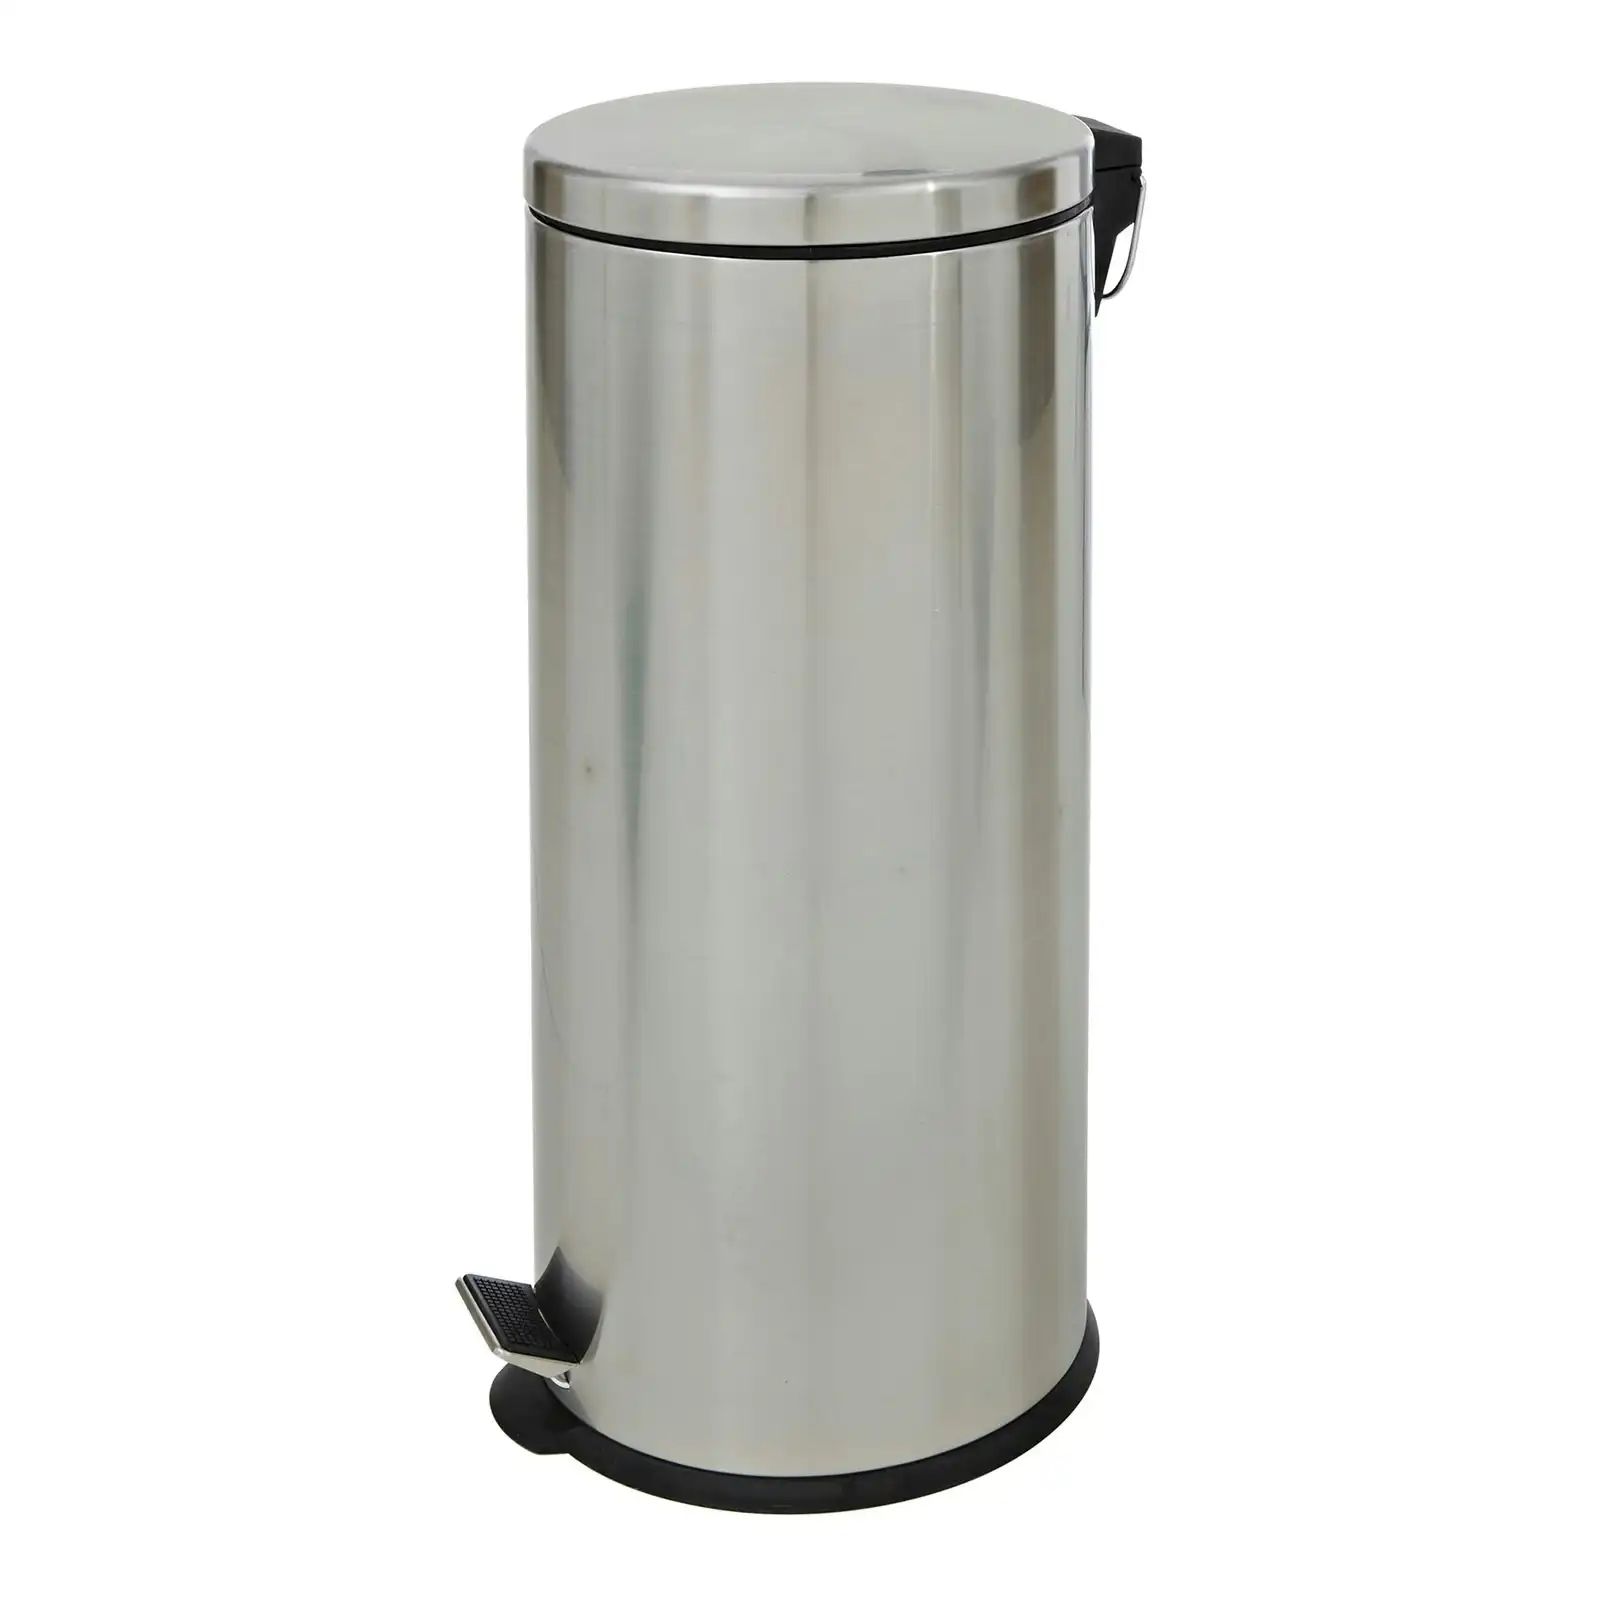 Livingstone Stainless Steel Pedal Step Bin Round 30L